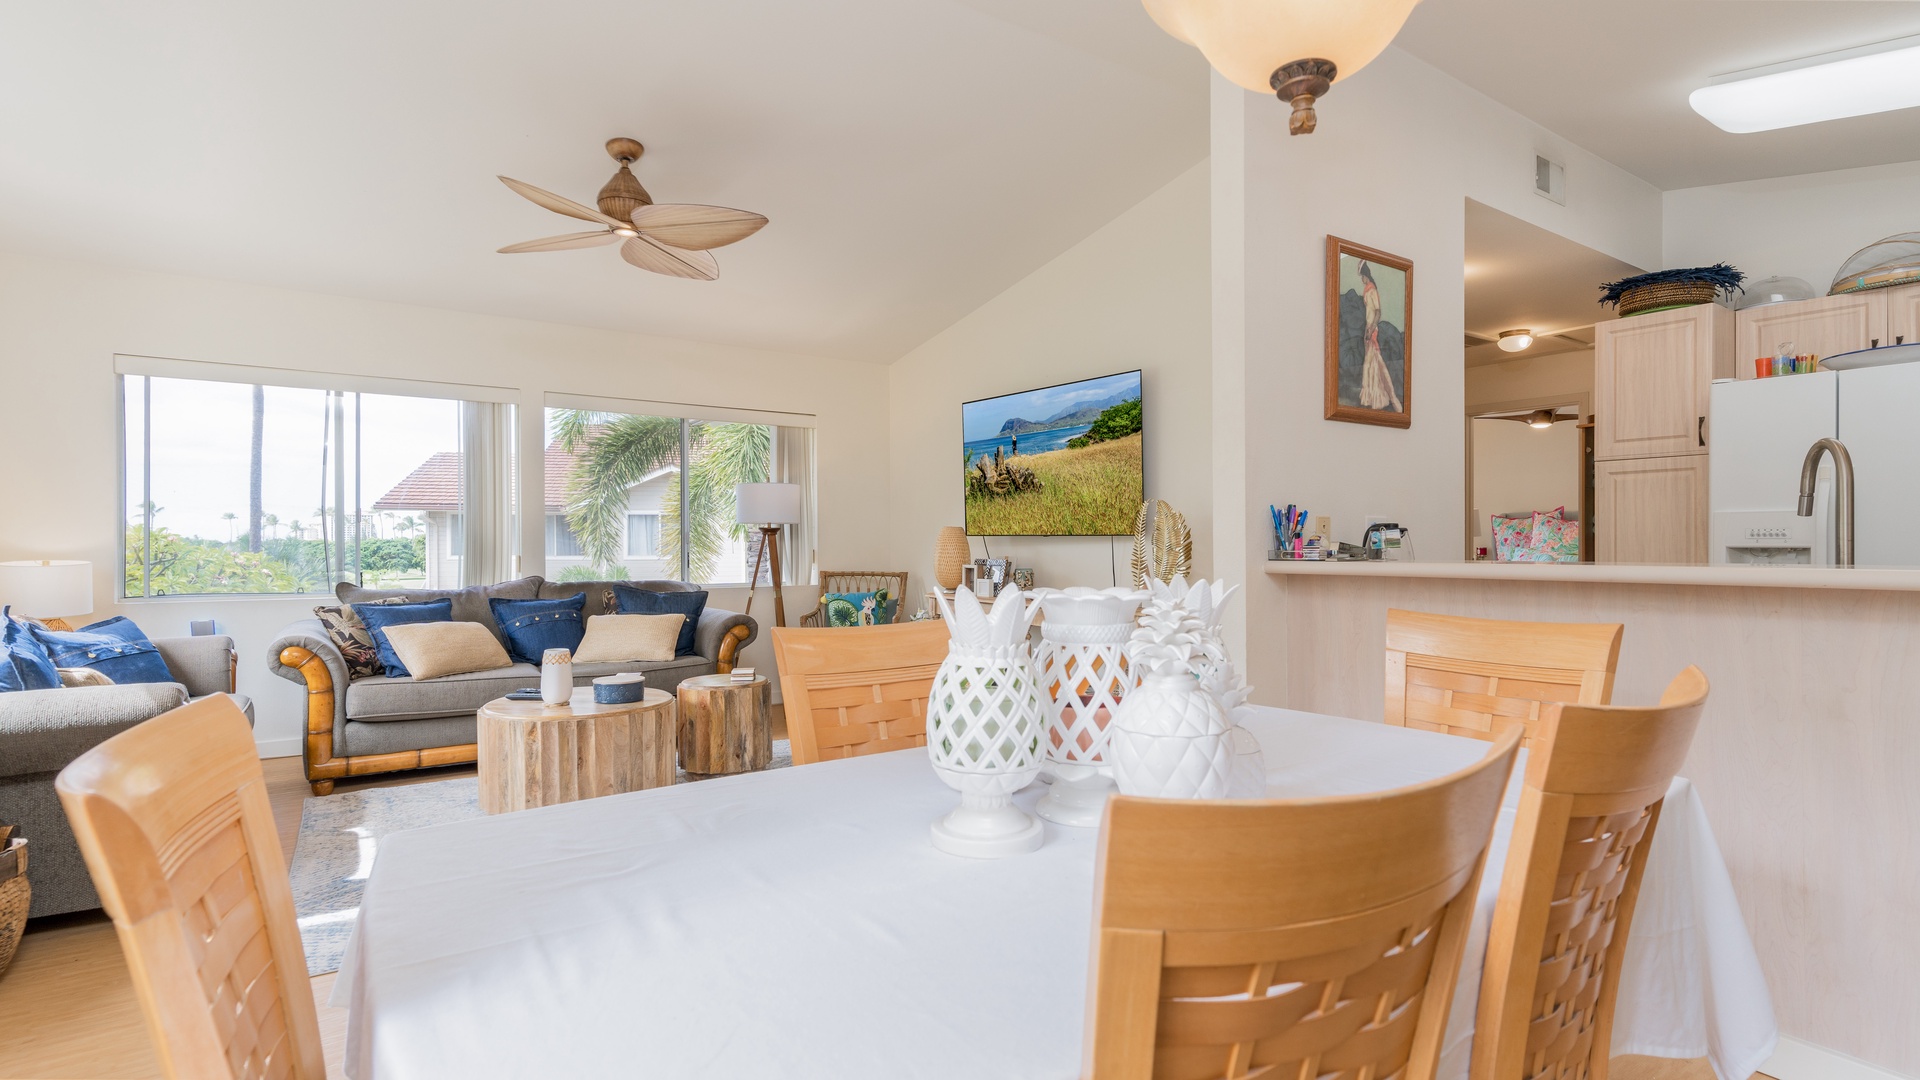 Kapolei Vacation Rentals, Fairways at Ko Olina 4A - Dine with a view and converse with the chef.